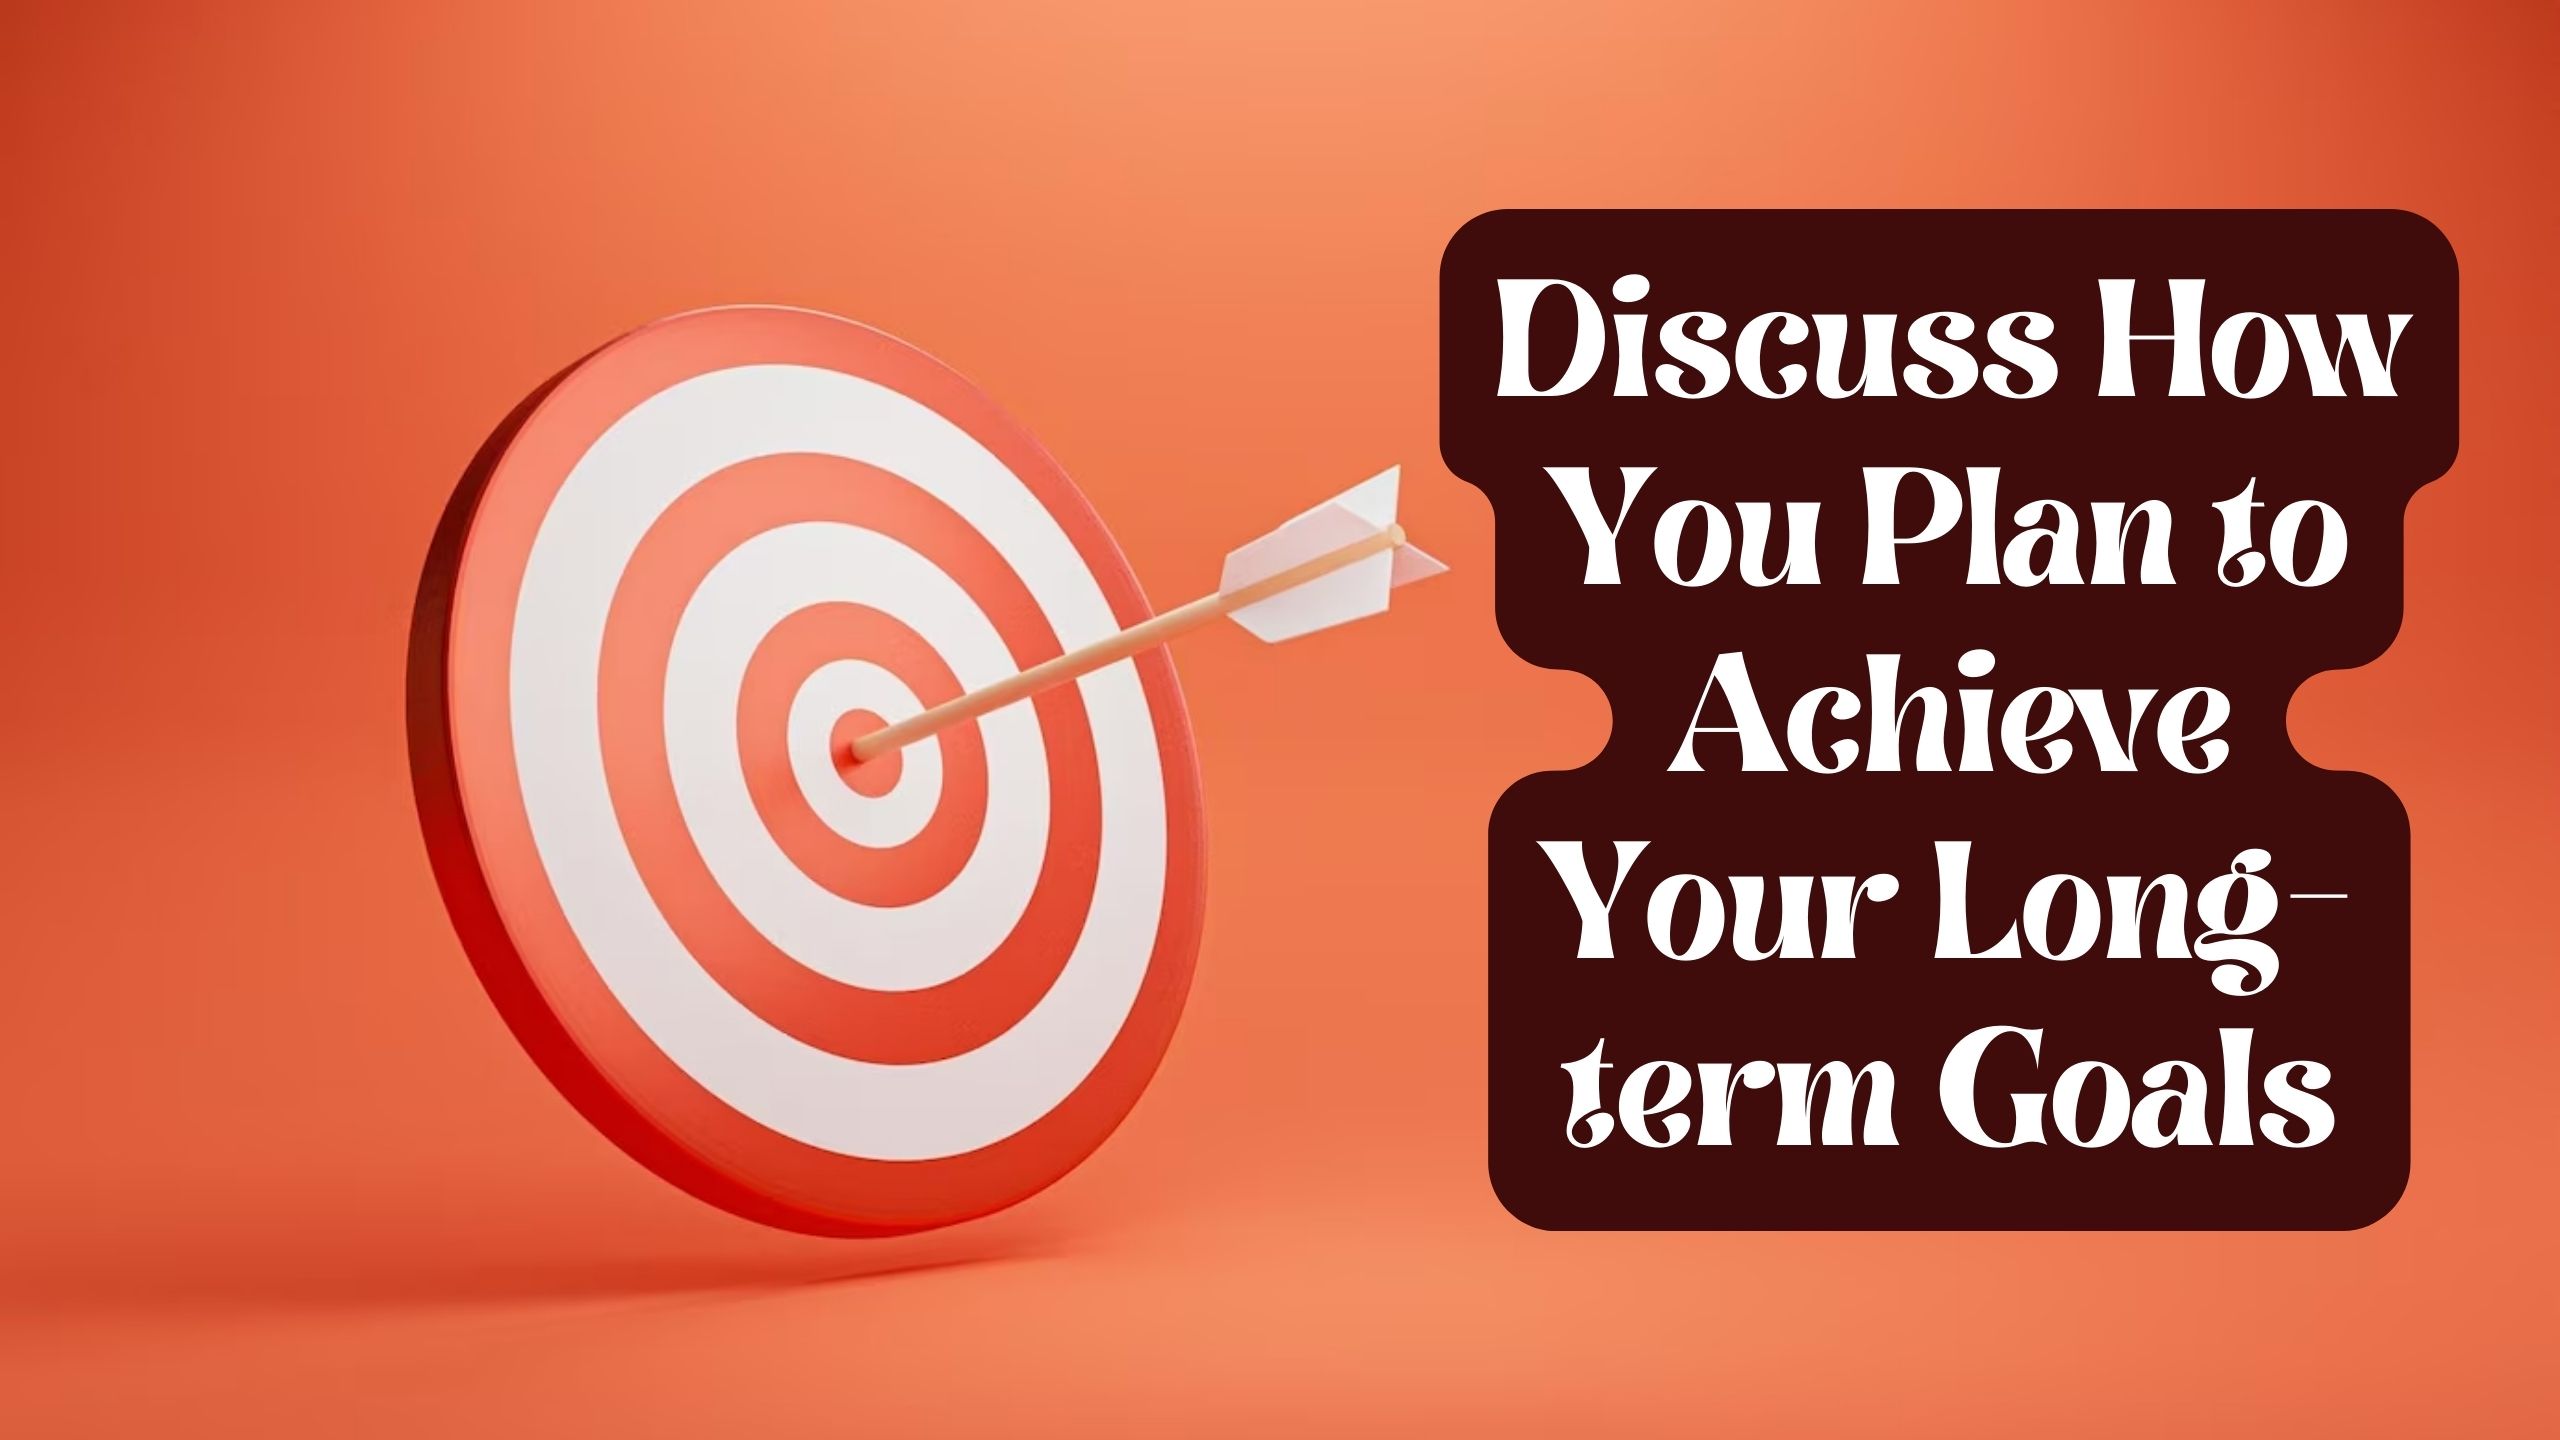 Discuss How You Plan to Achieve Your Long-term Goals